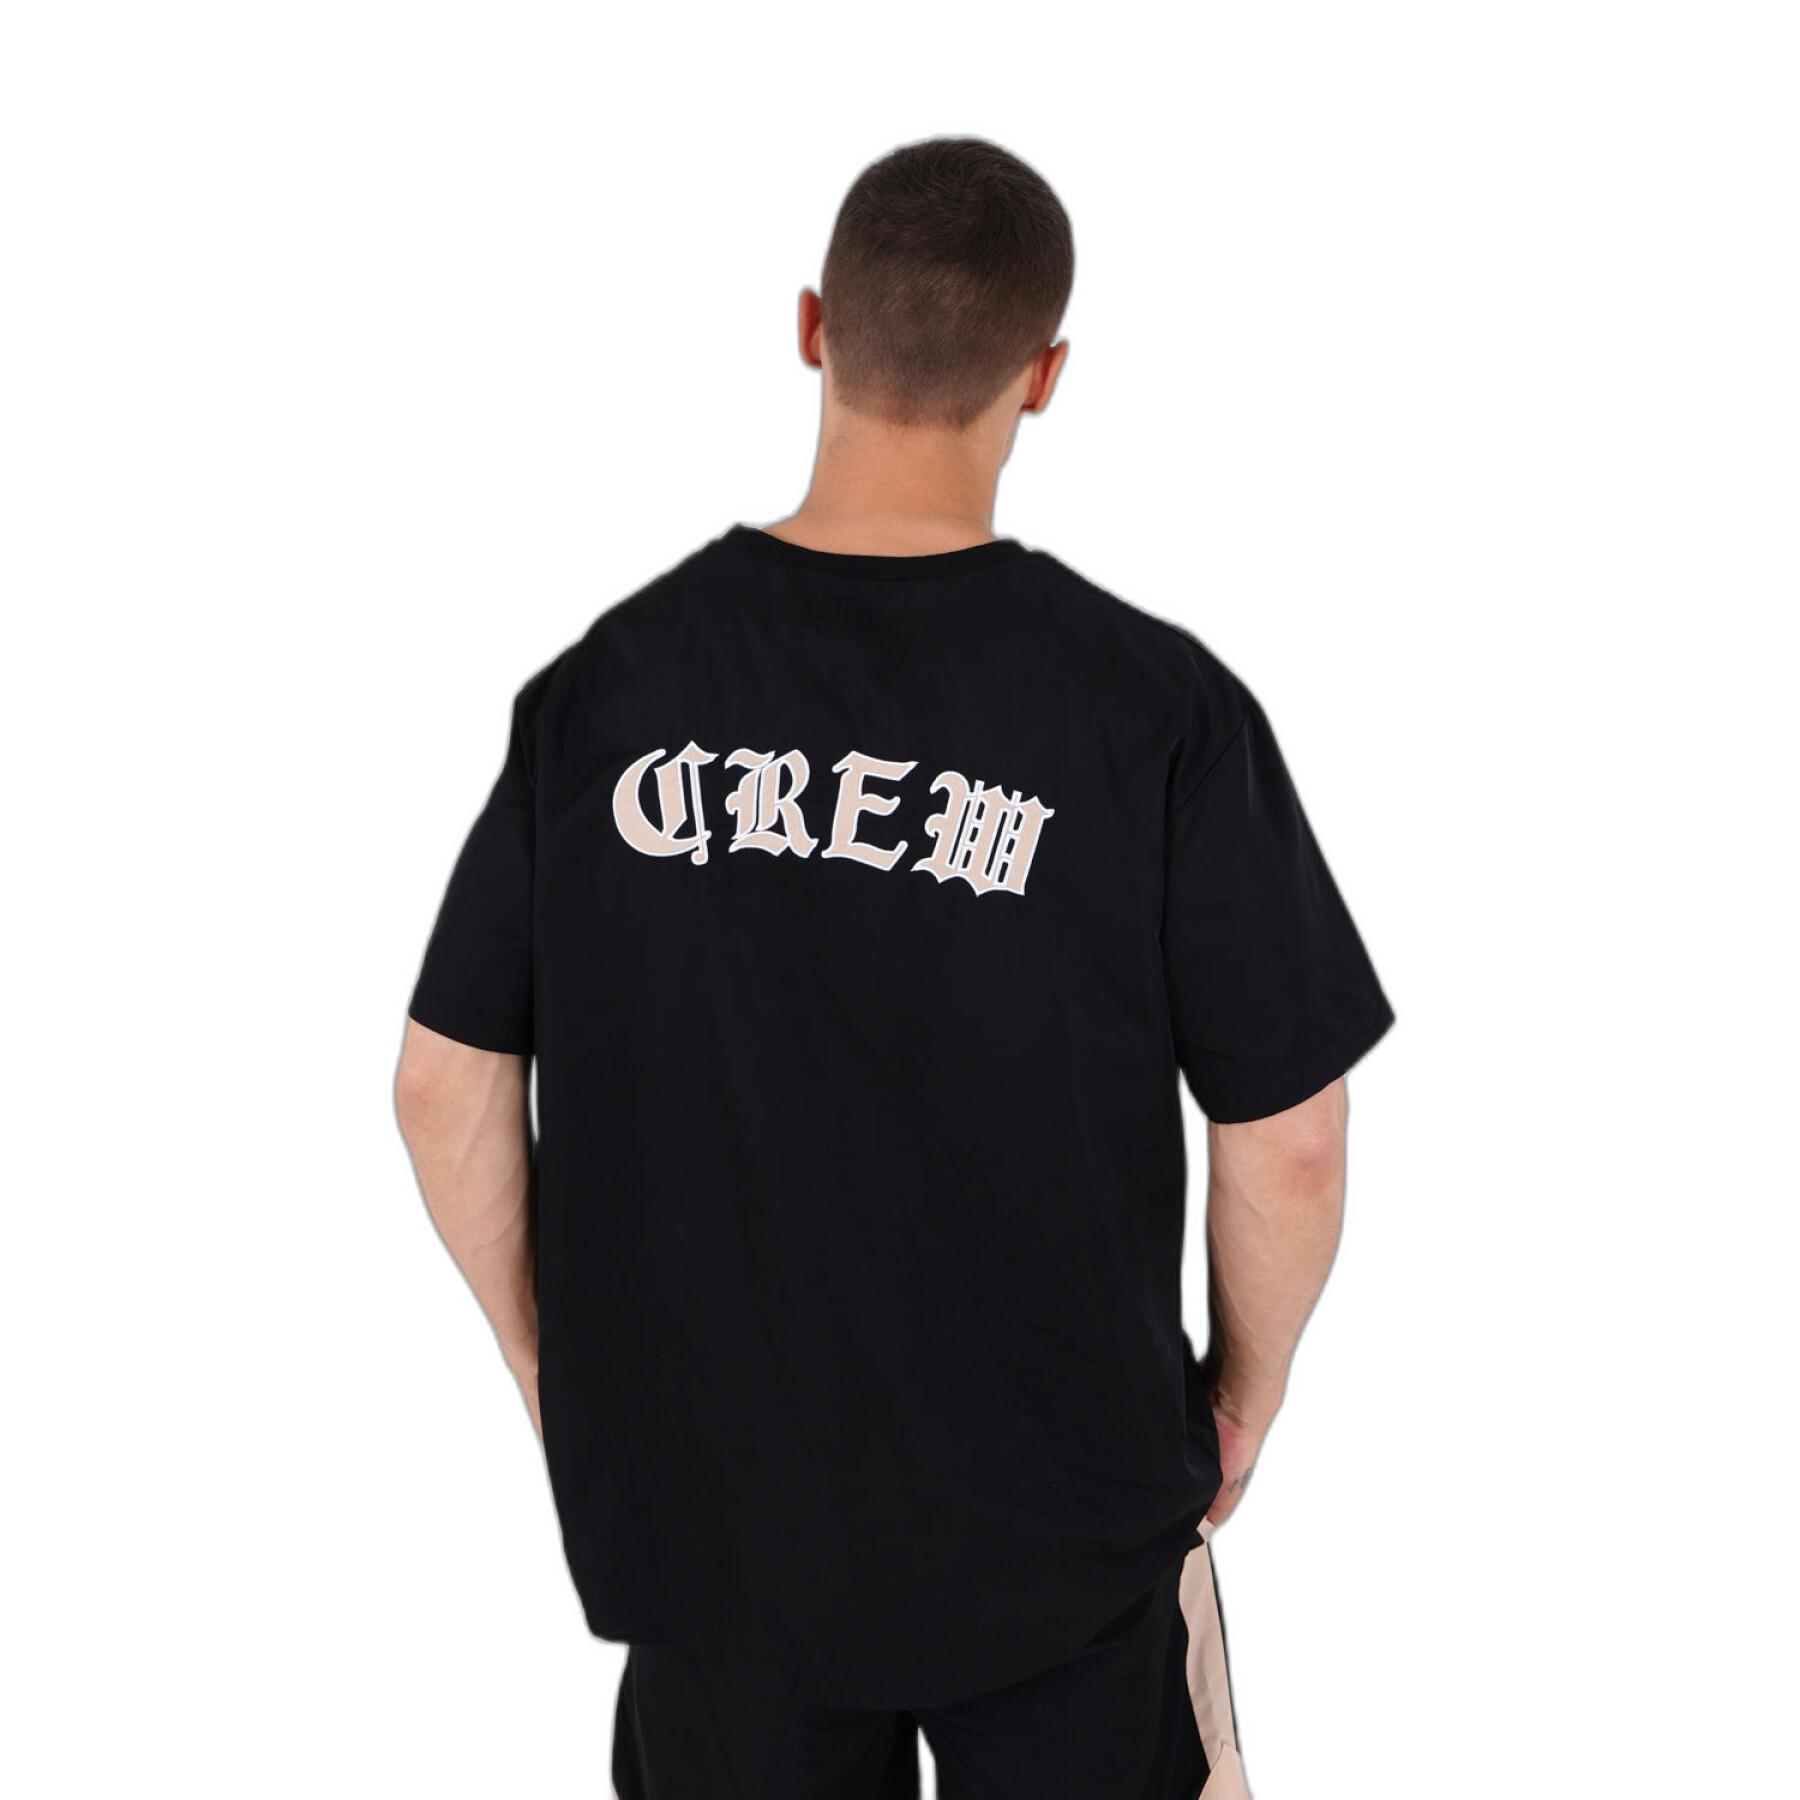 Oversized T-shirt Sixth June Gothic Letters